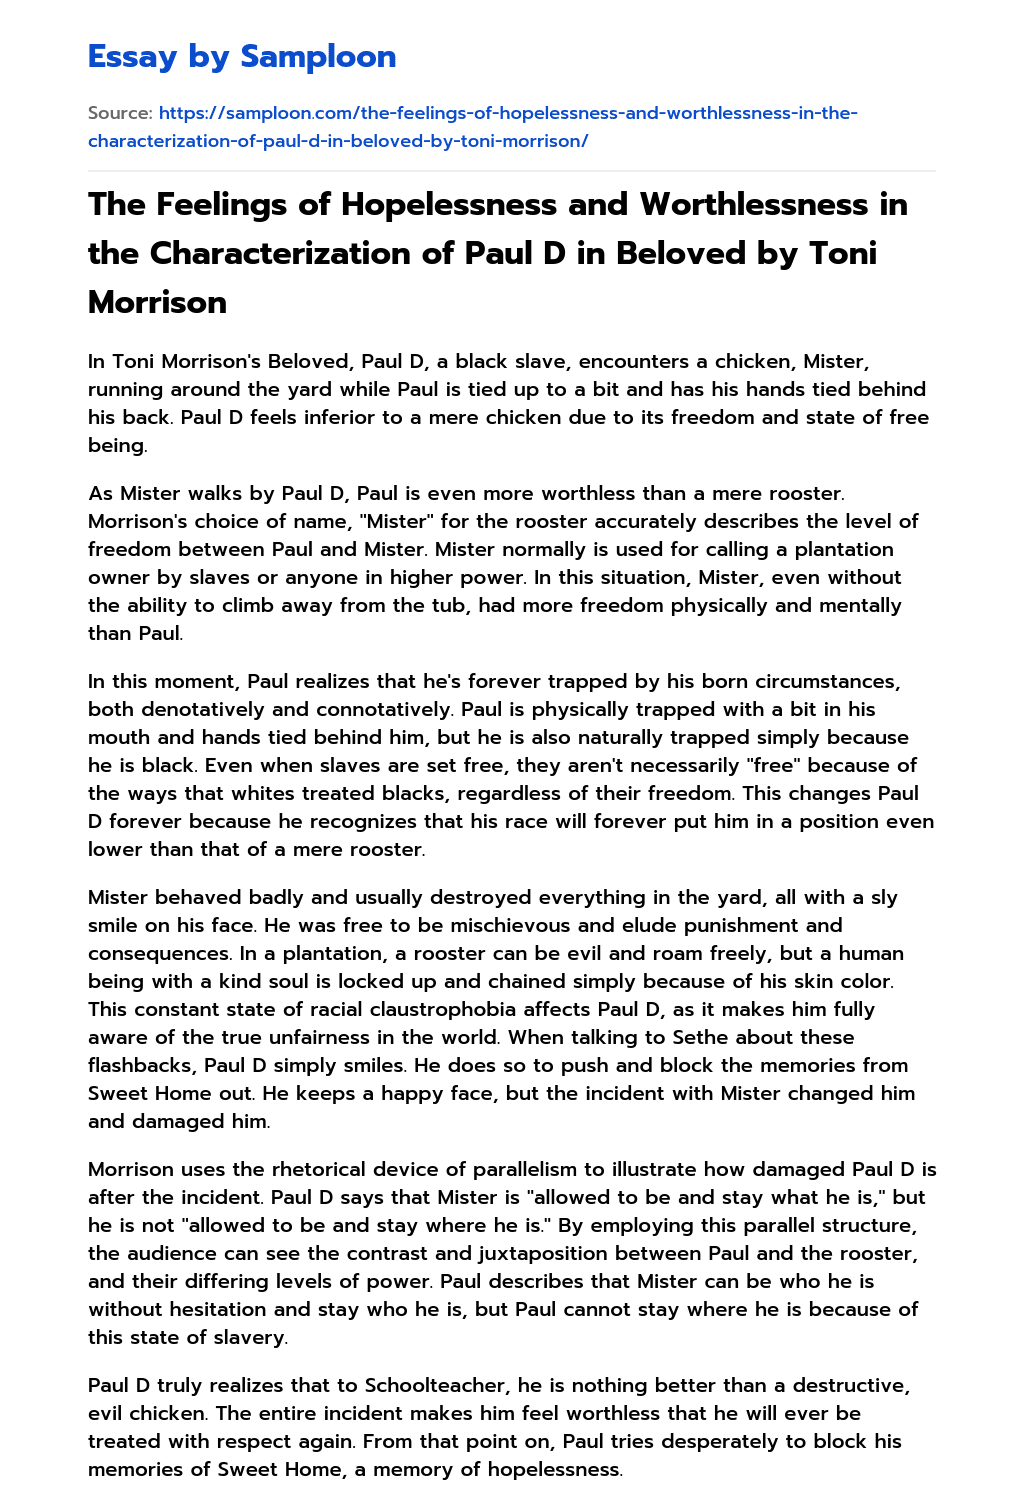 The Feelings of Hopelessness and Worthlessness in the Characterization of Paul D in Beloved by Toni Morrison essay